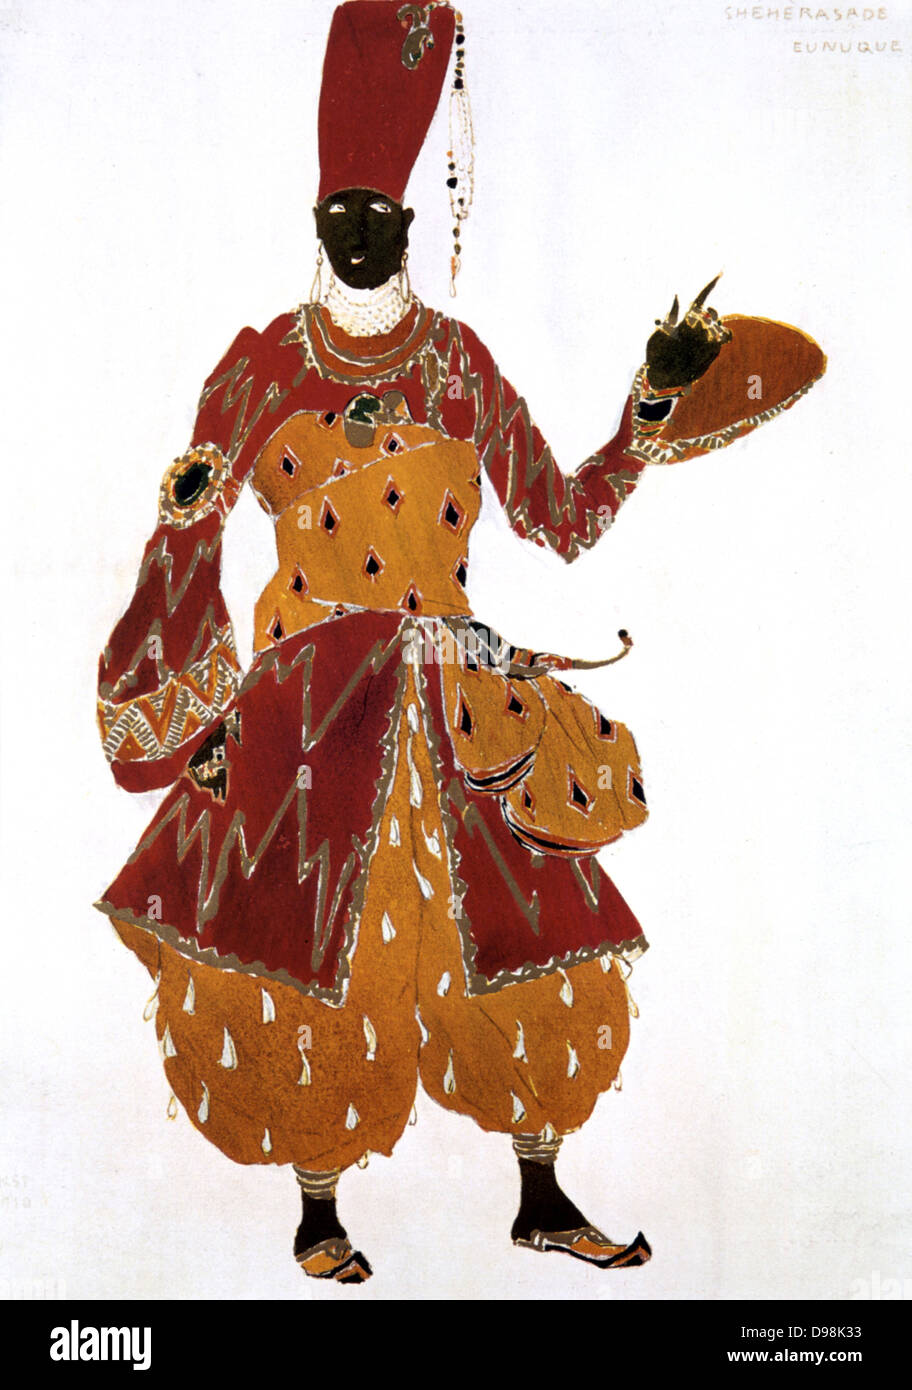 Costume design by Leon Bakst (1866-1924) for the Eunuch in 'Scheherazade' produced in 1910 by Sergei Diaghilev's Ballets Russes. Music by Nikolai Rimsky-Korsakov, choreography by Michel Fokine. Stock Photo